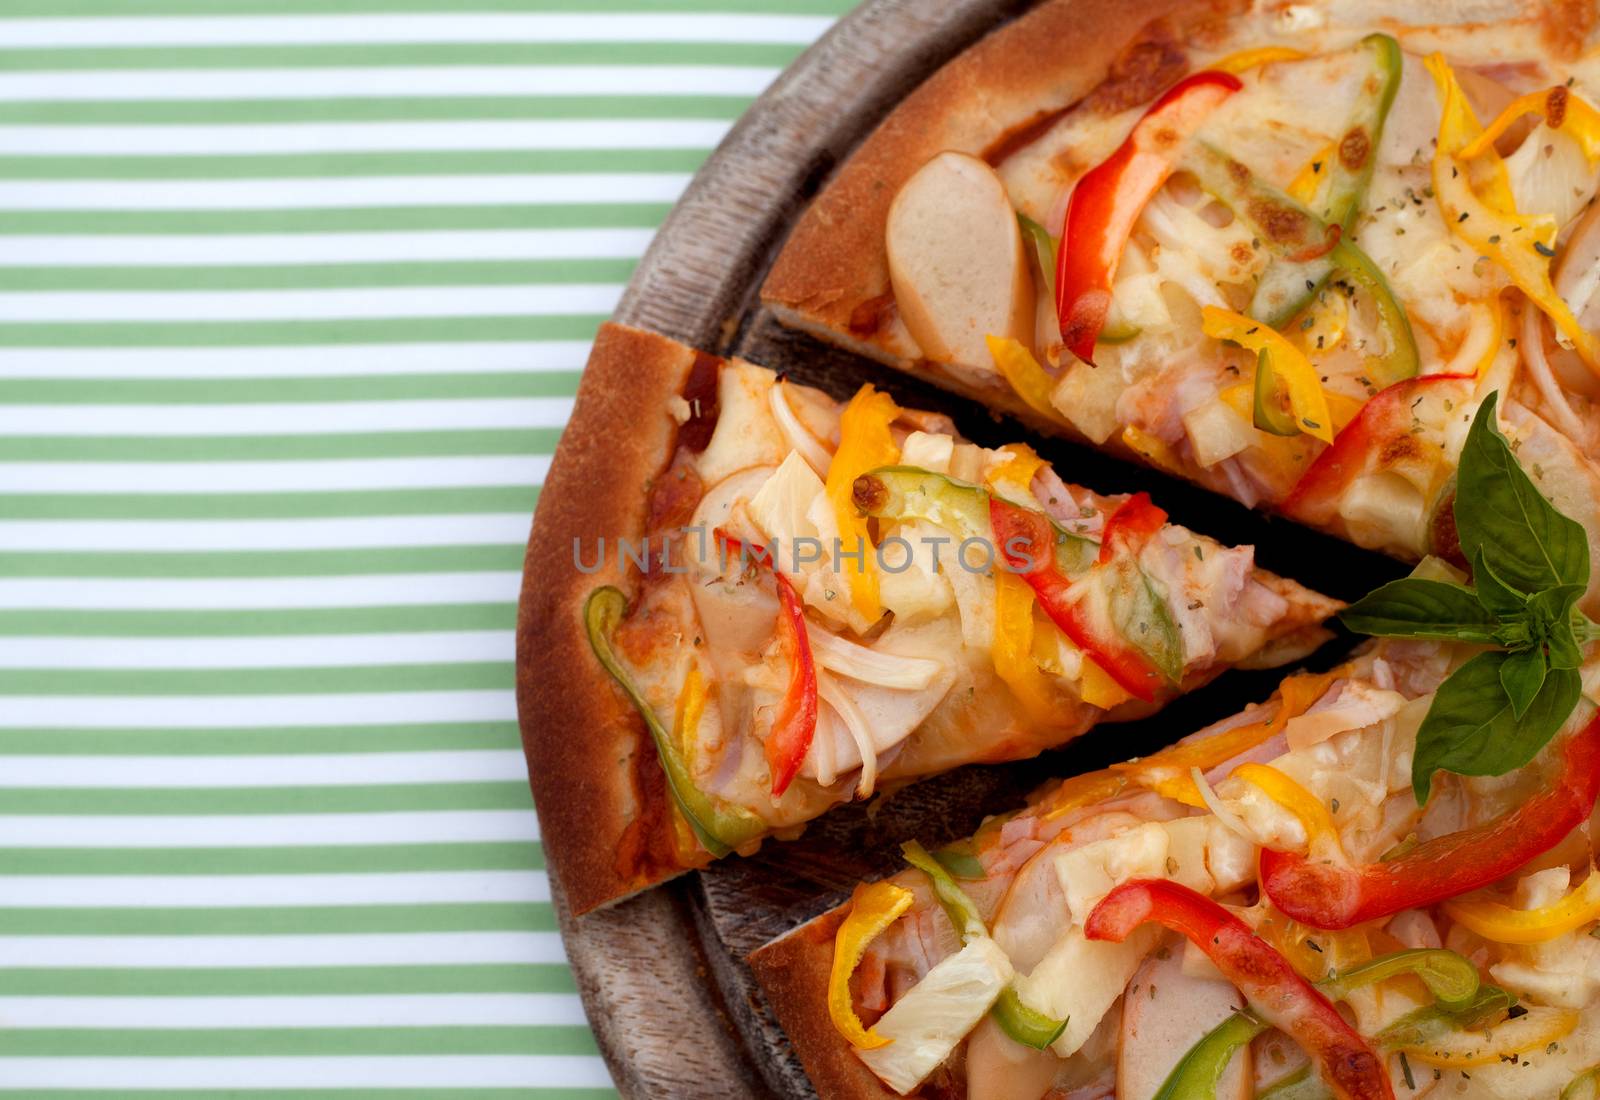 Delicious homemade pizza with ham and vegetables.